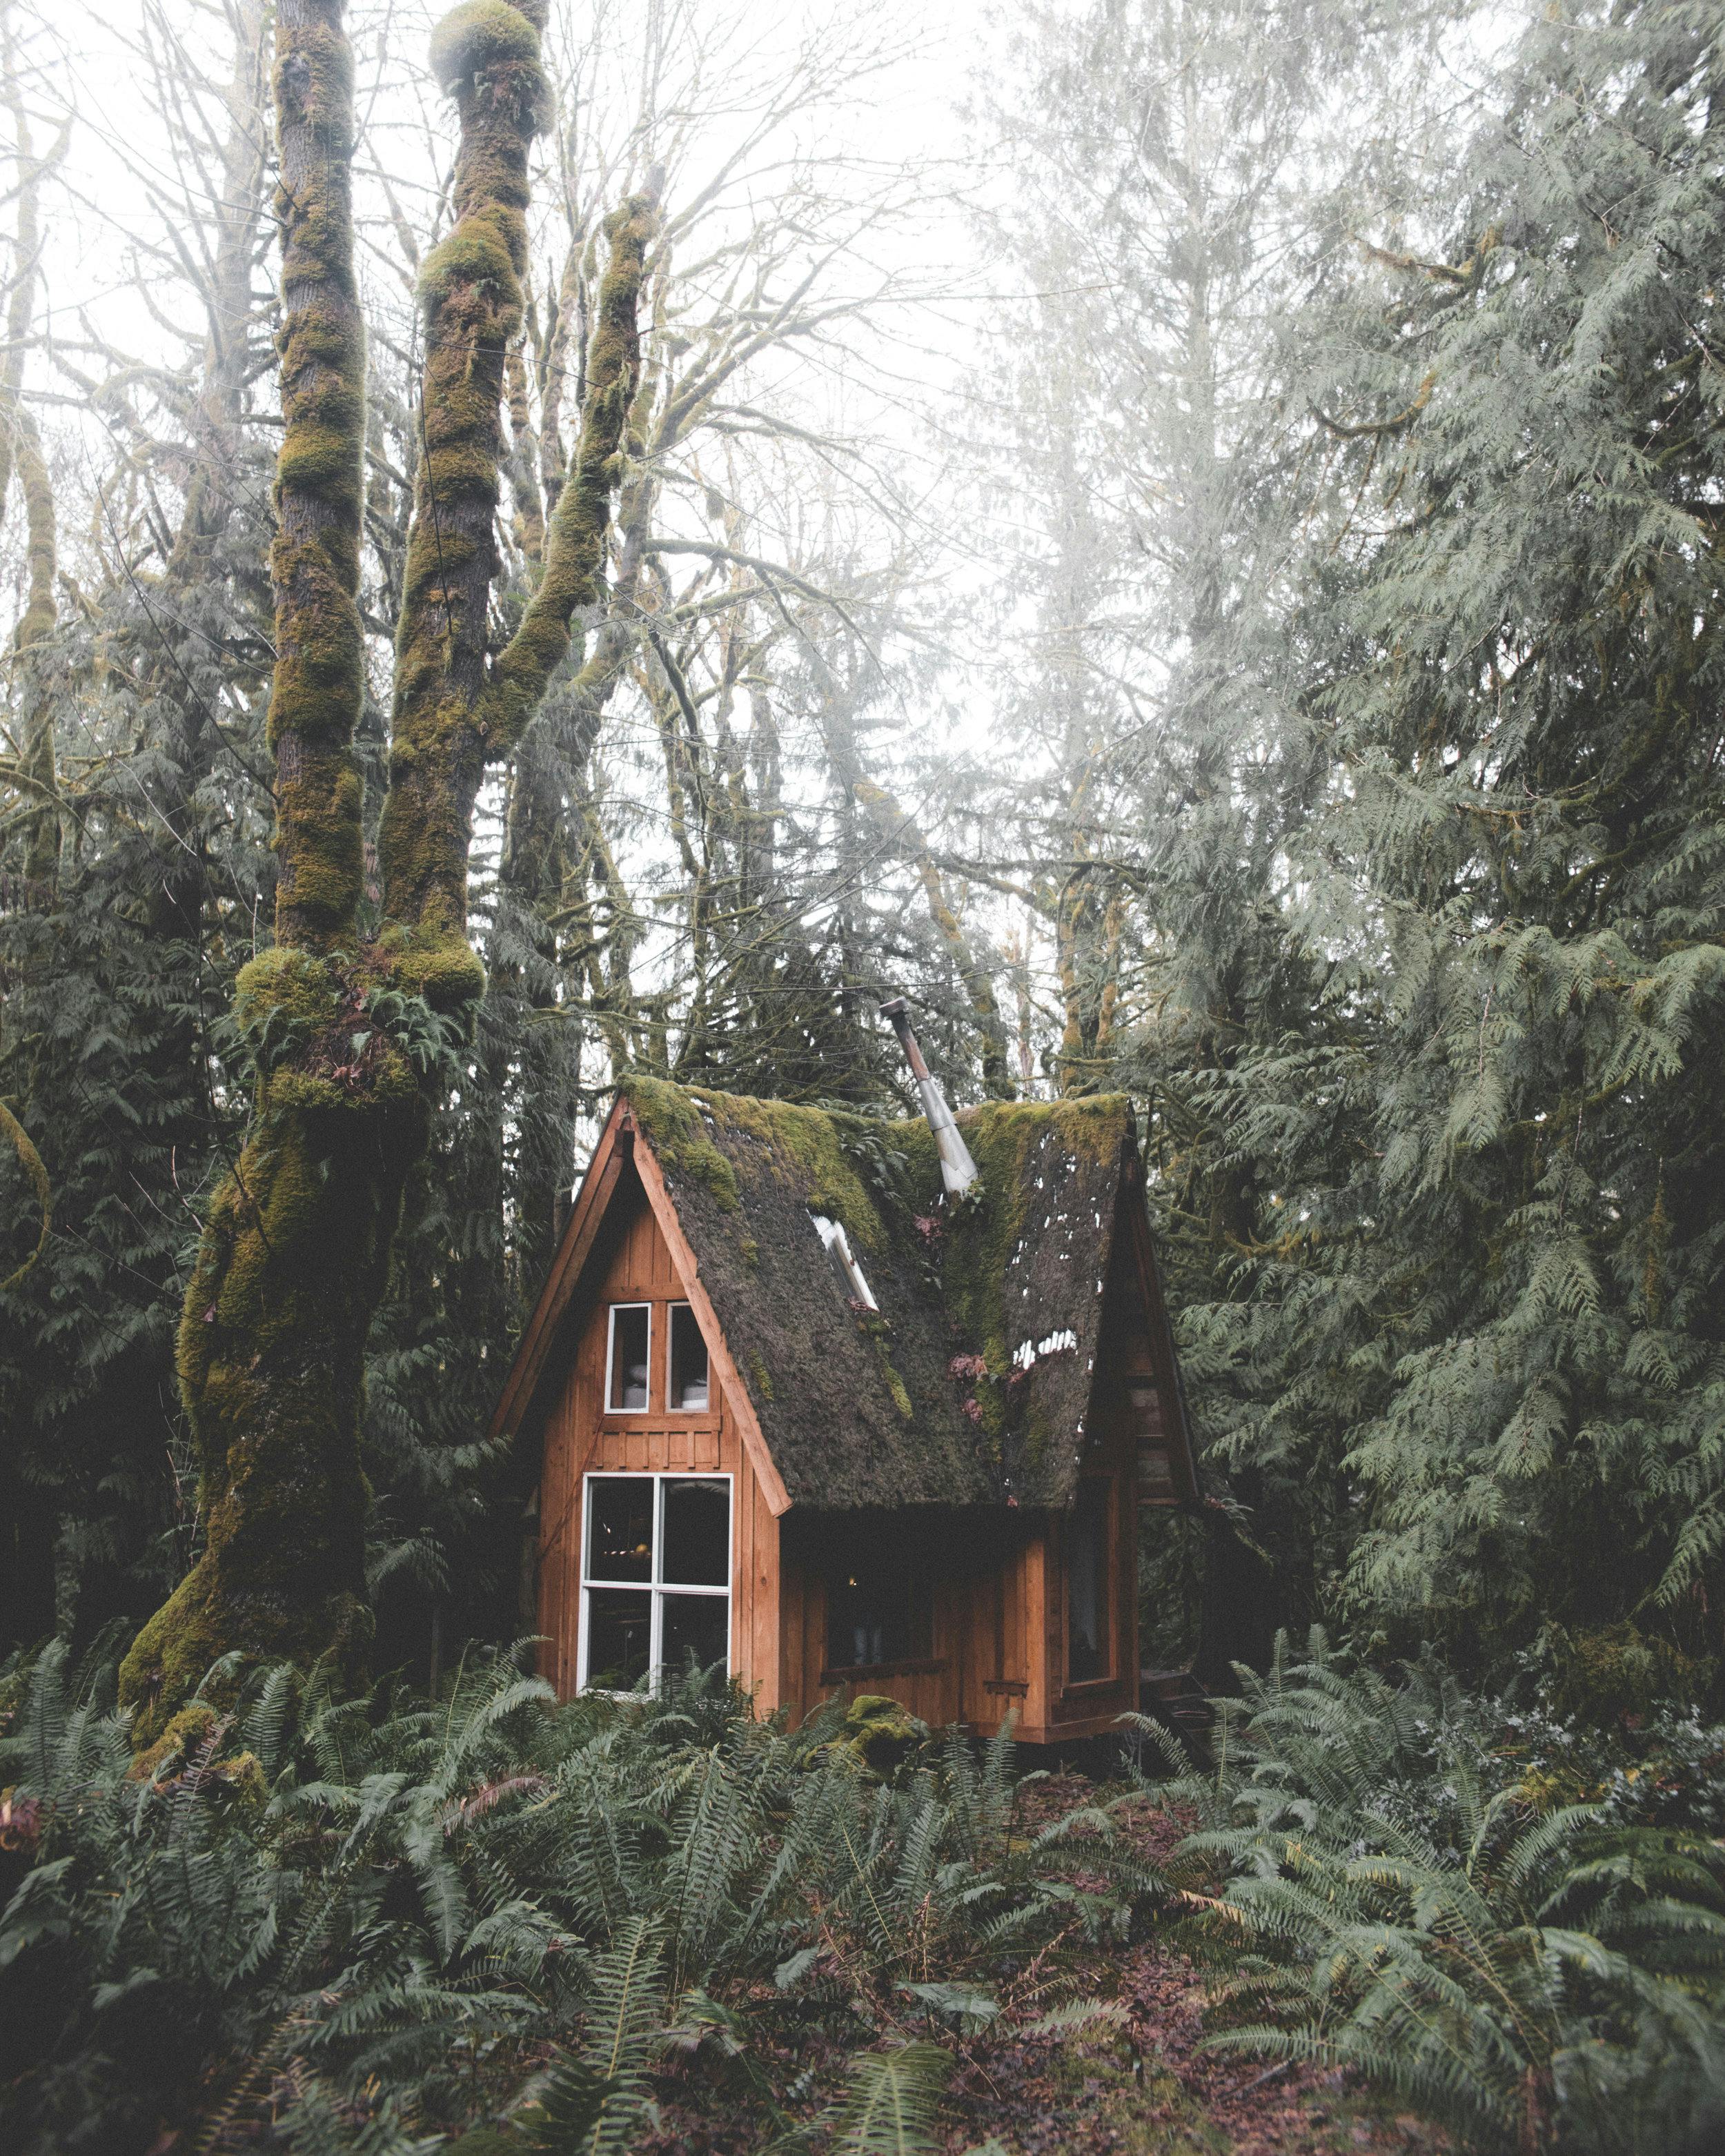 Wooden house in the forest. | Photo: Pexels